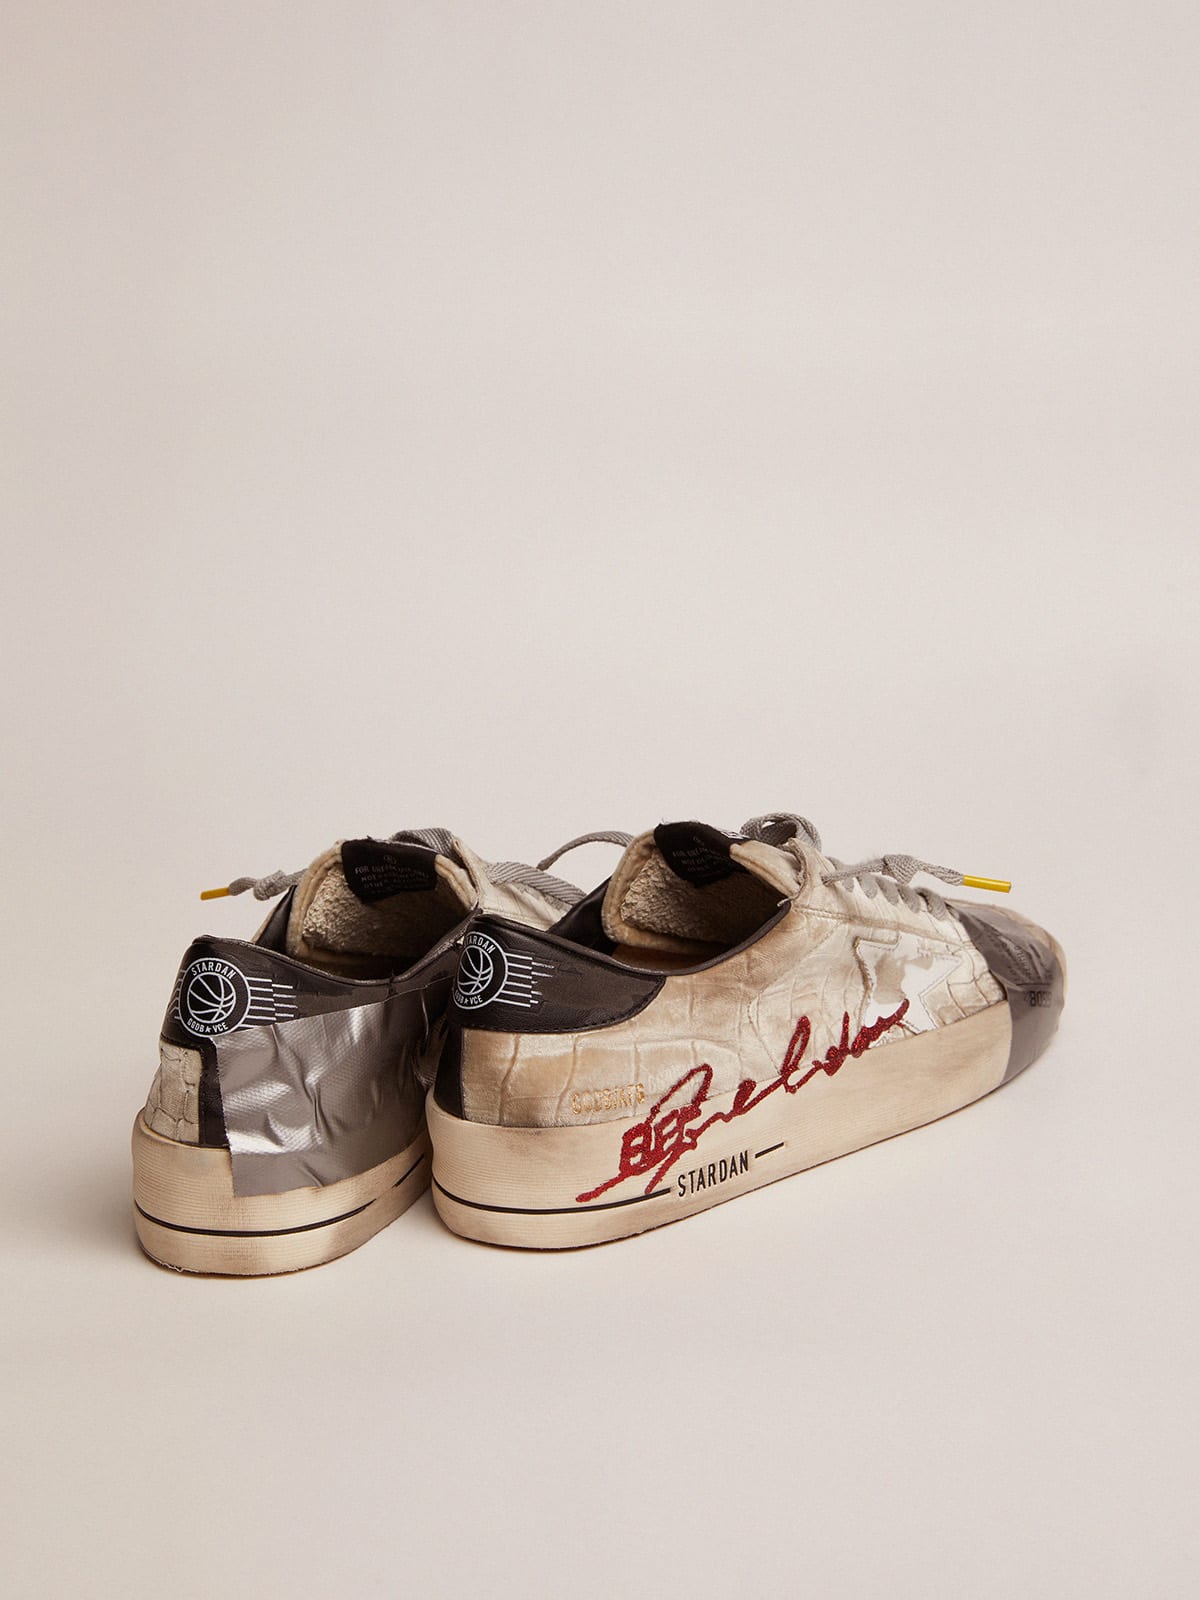 Golden Goose - Stardan LAB sneakers with silver velvet upper and crocodile print in 